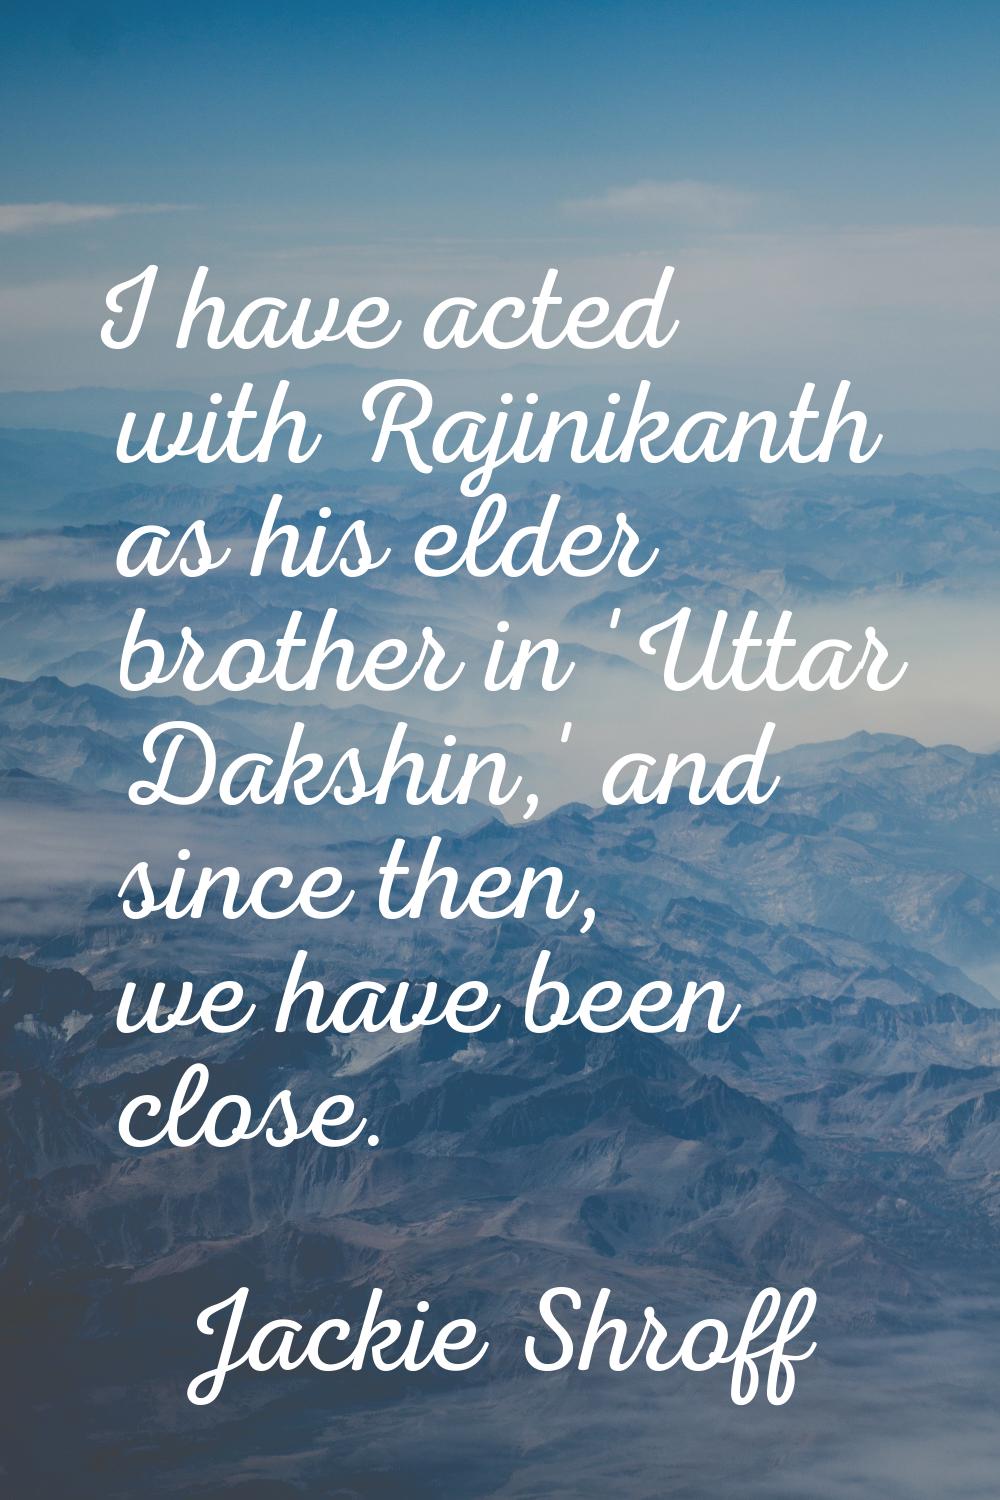 I have acted with Rajinikanth as his elder brother in 'Uttar Dakshin,' and since then, we have been